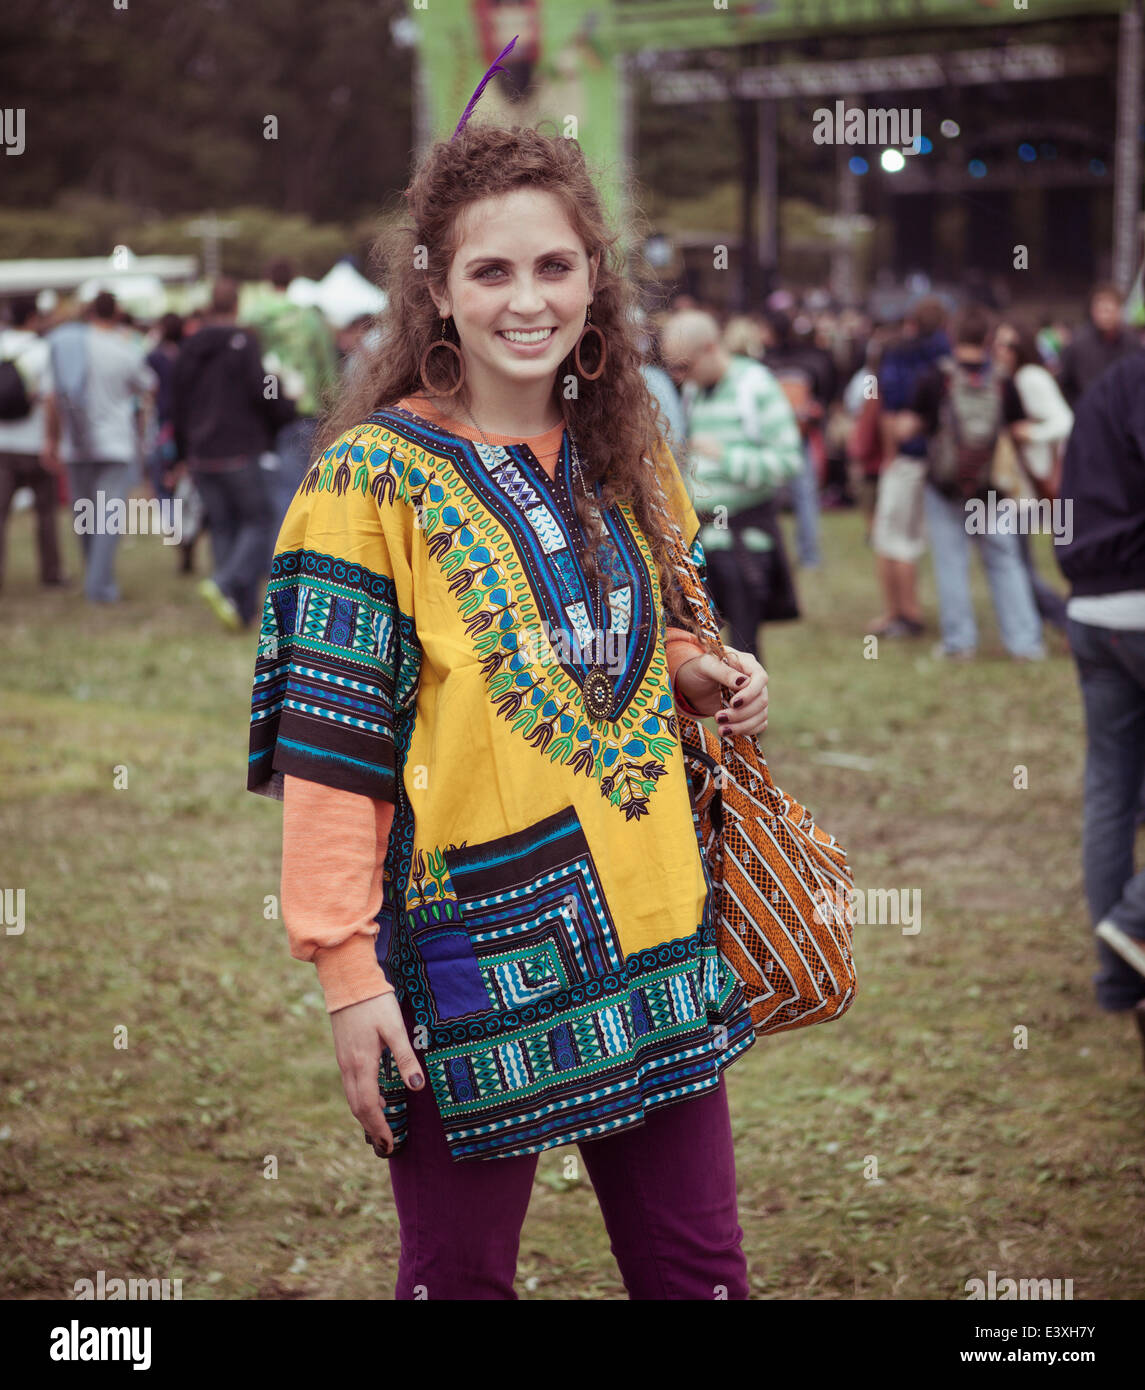 Woman wearing decorative poncho at festival Stock Photo